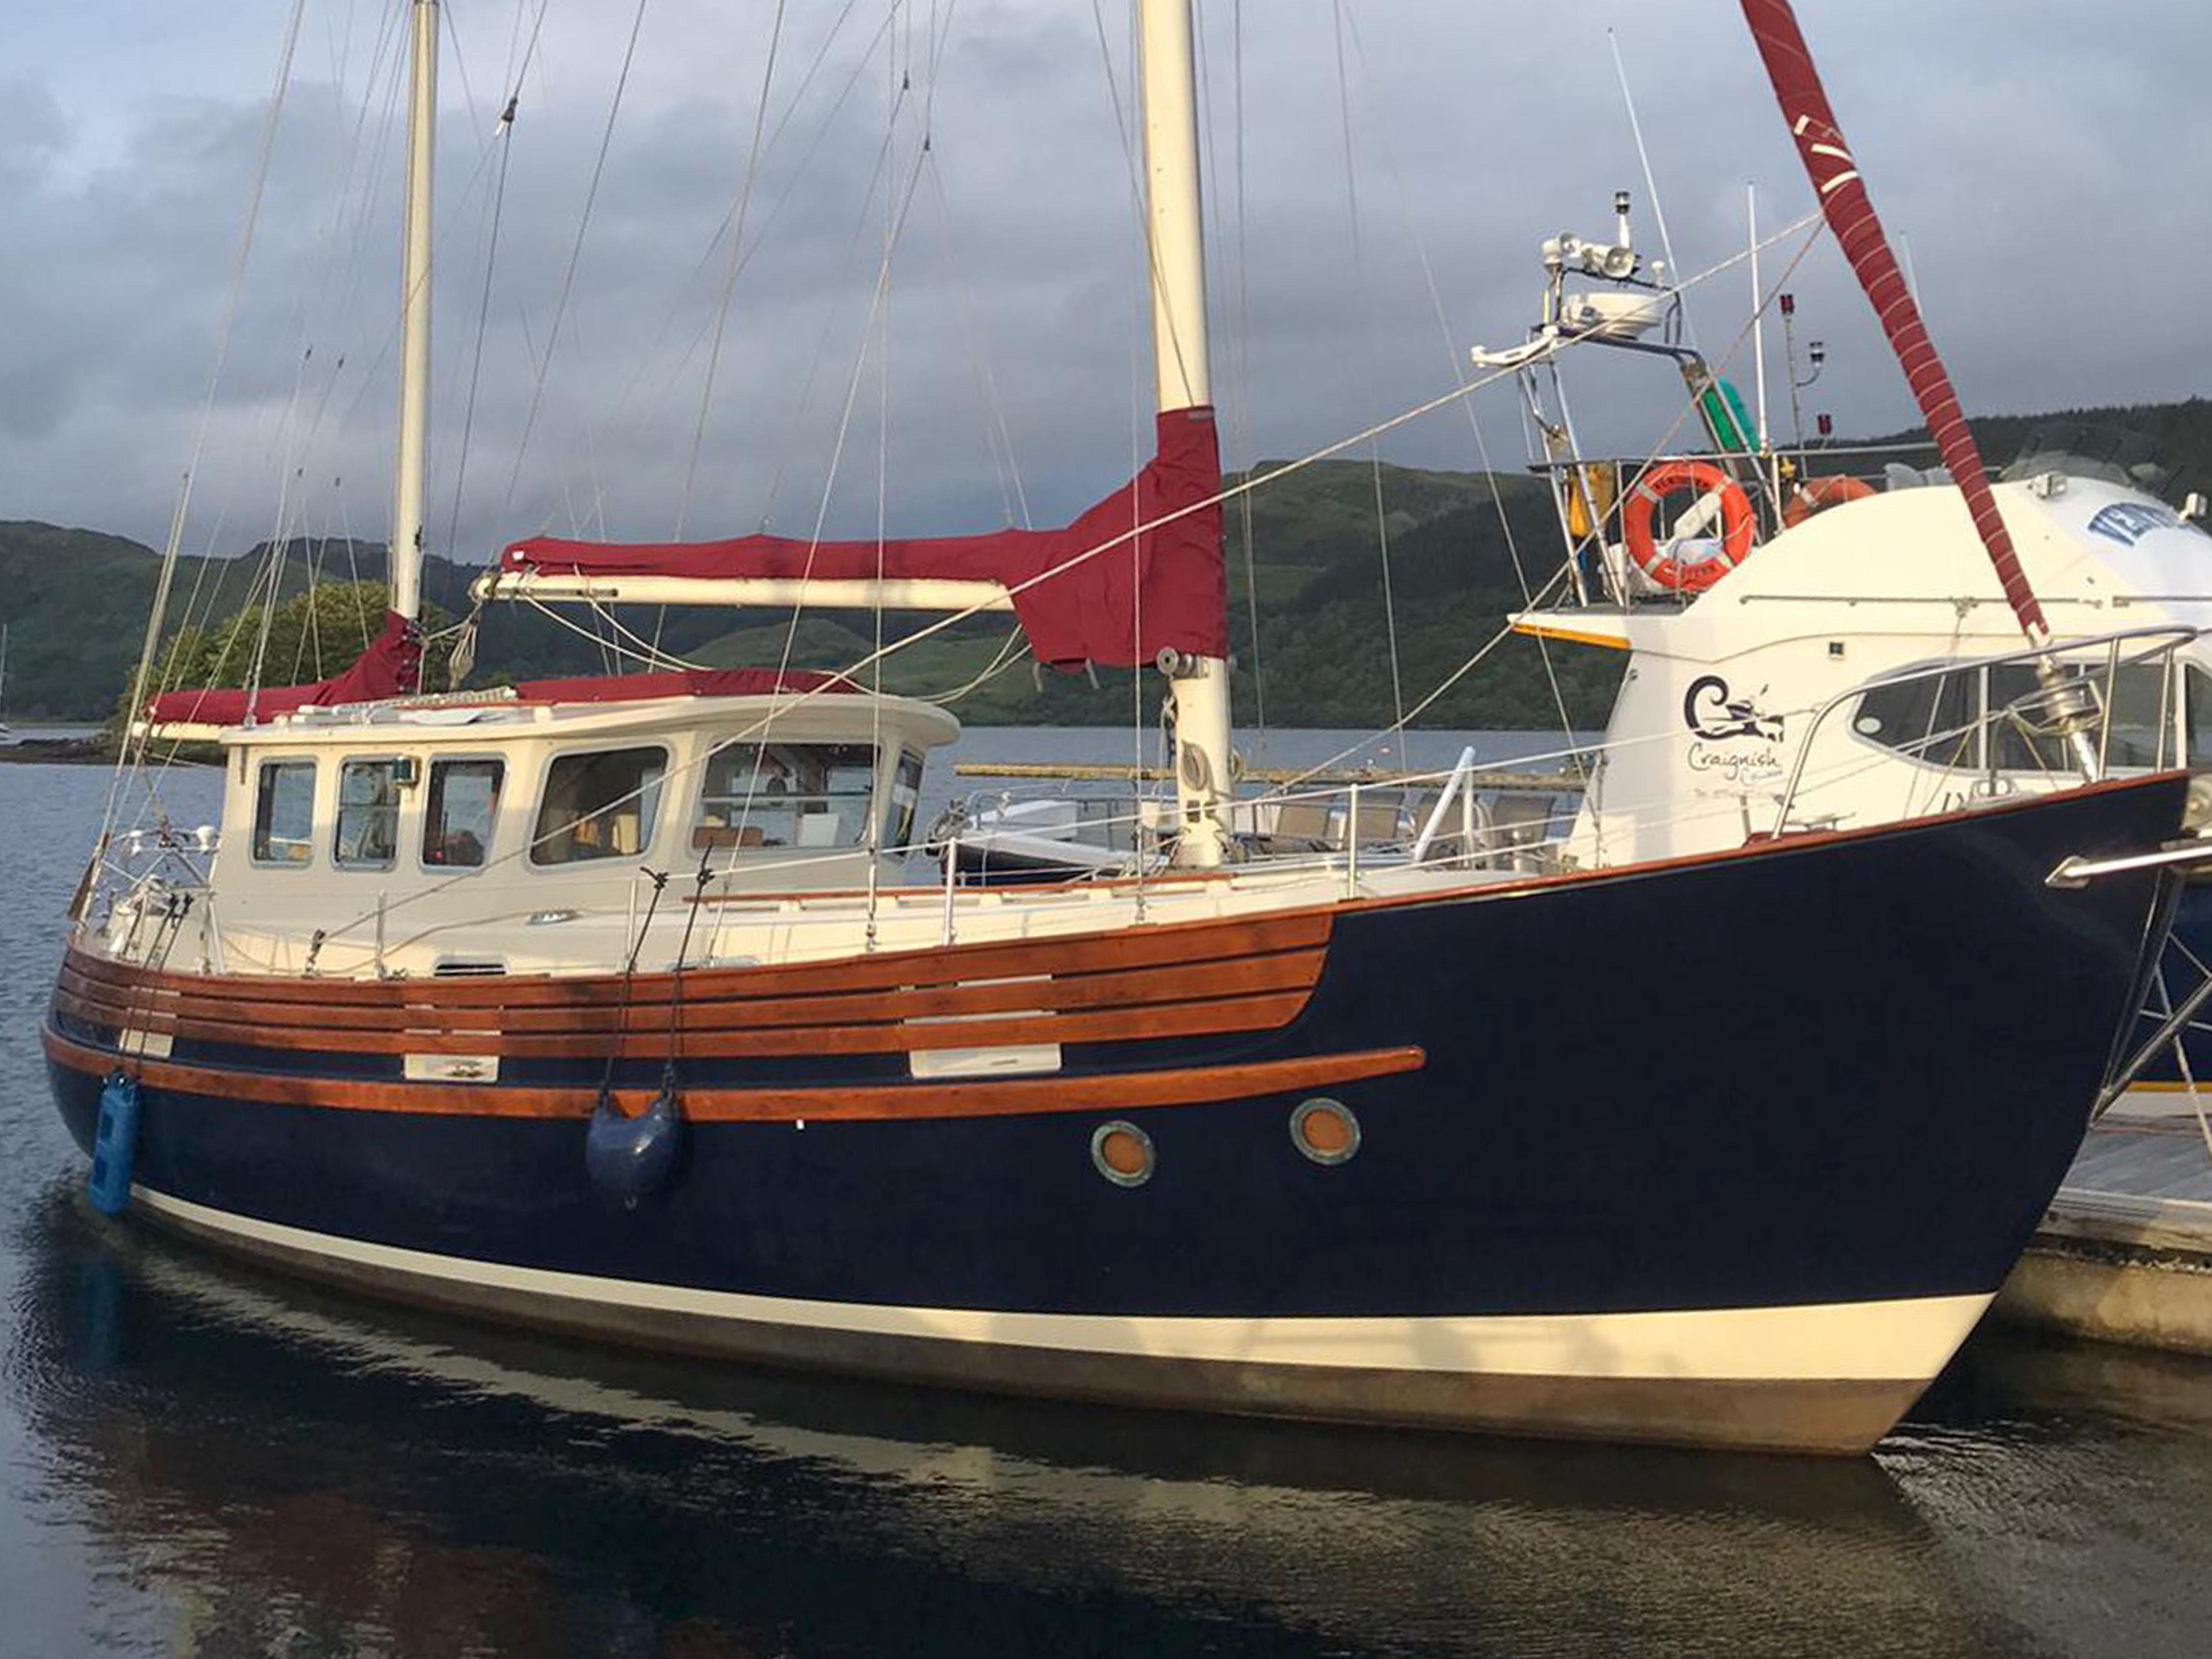 37 ft sailboat for sale